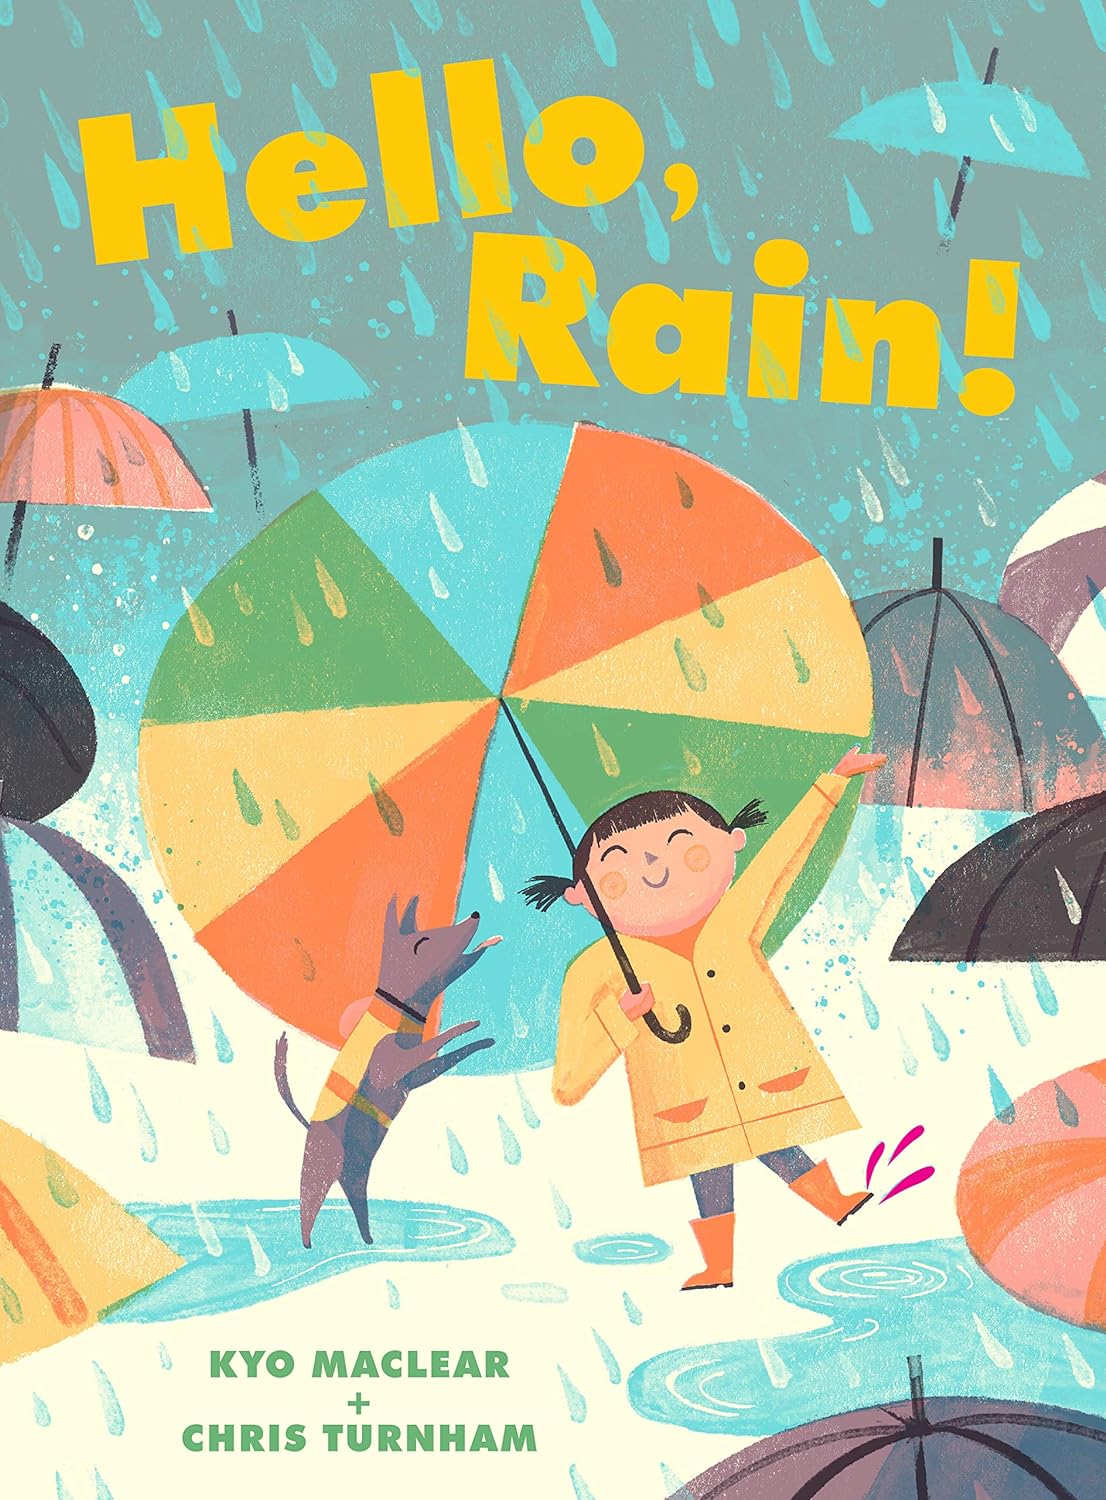 A picture book celebrating all the reasons to love the rain! Flowers bloom in the garden. Umbrellas bloom on the streets. There are puddles for jumping and, later, a cozy home for hot chocolate and books.  From international acclaimed writer Kyo Maclear and printmaker Chris Turnham